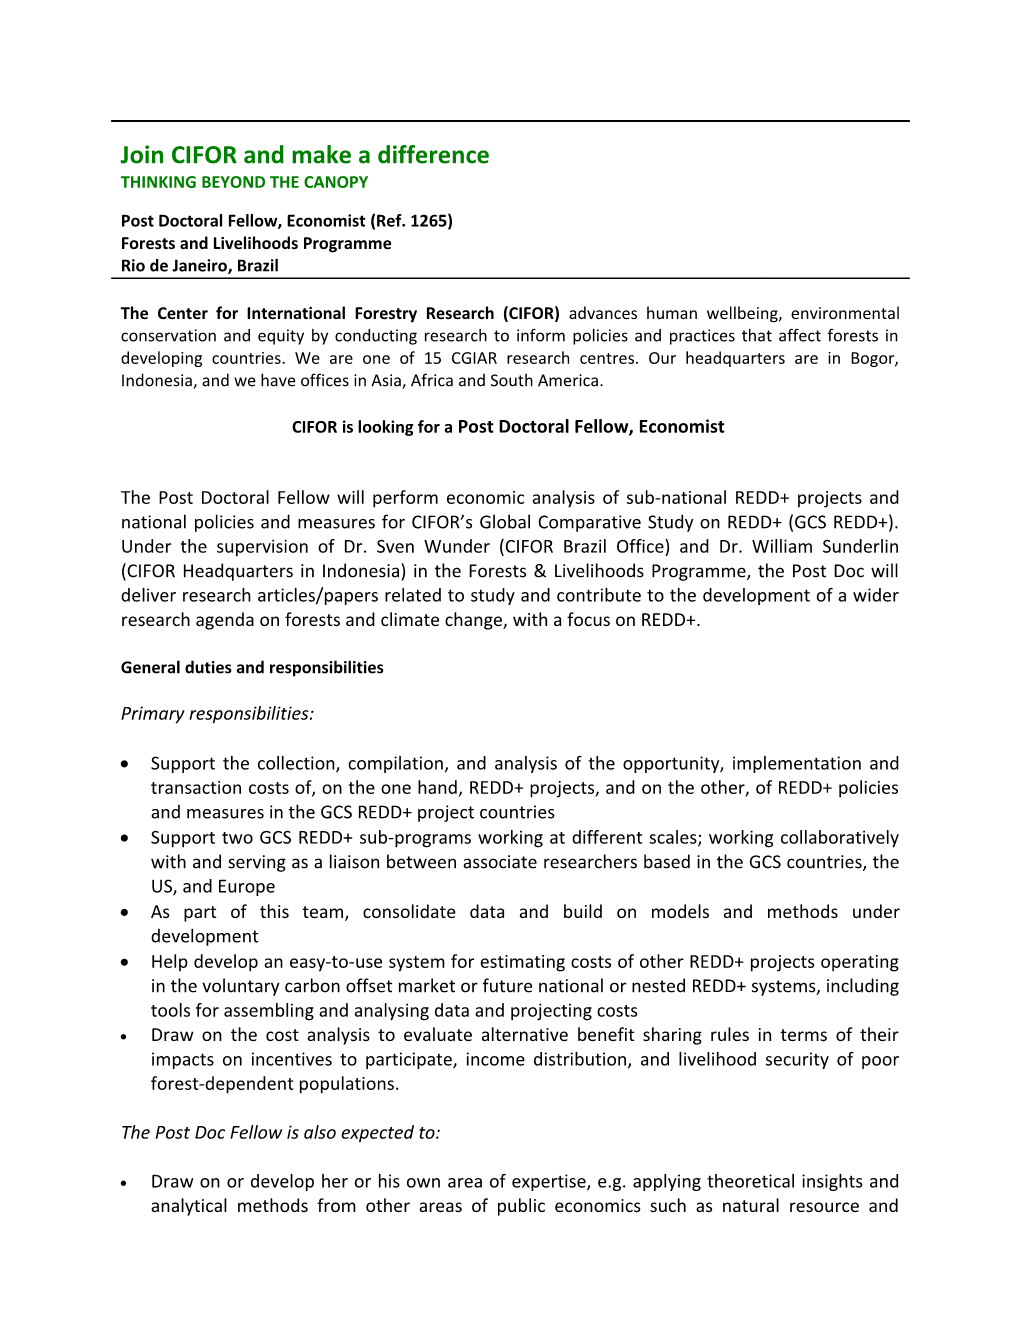 CIFOR Is Looking for a Post Doctoral Fellow, Economist